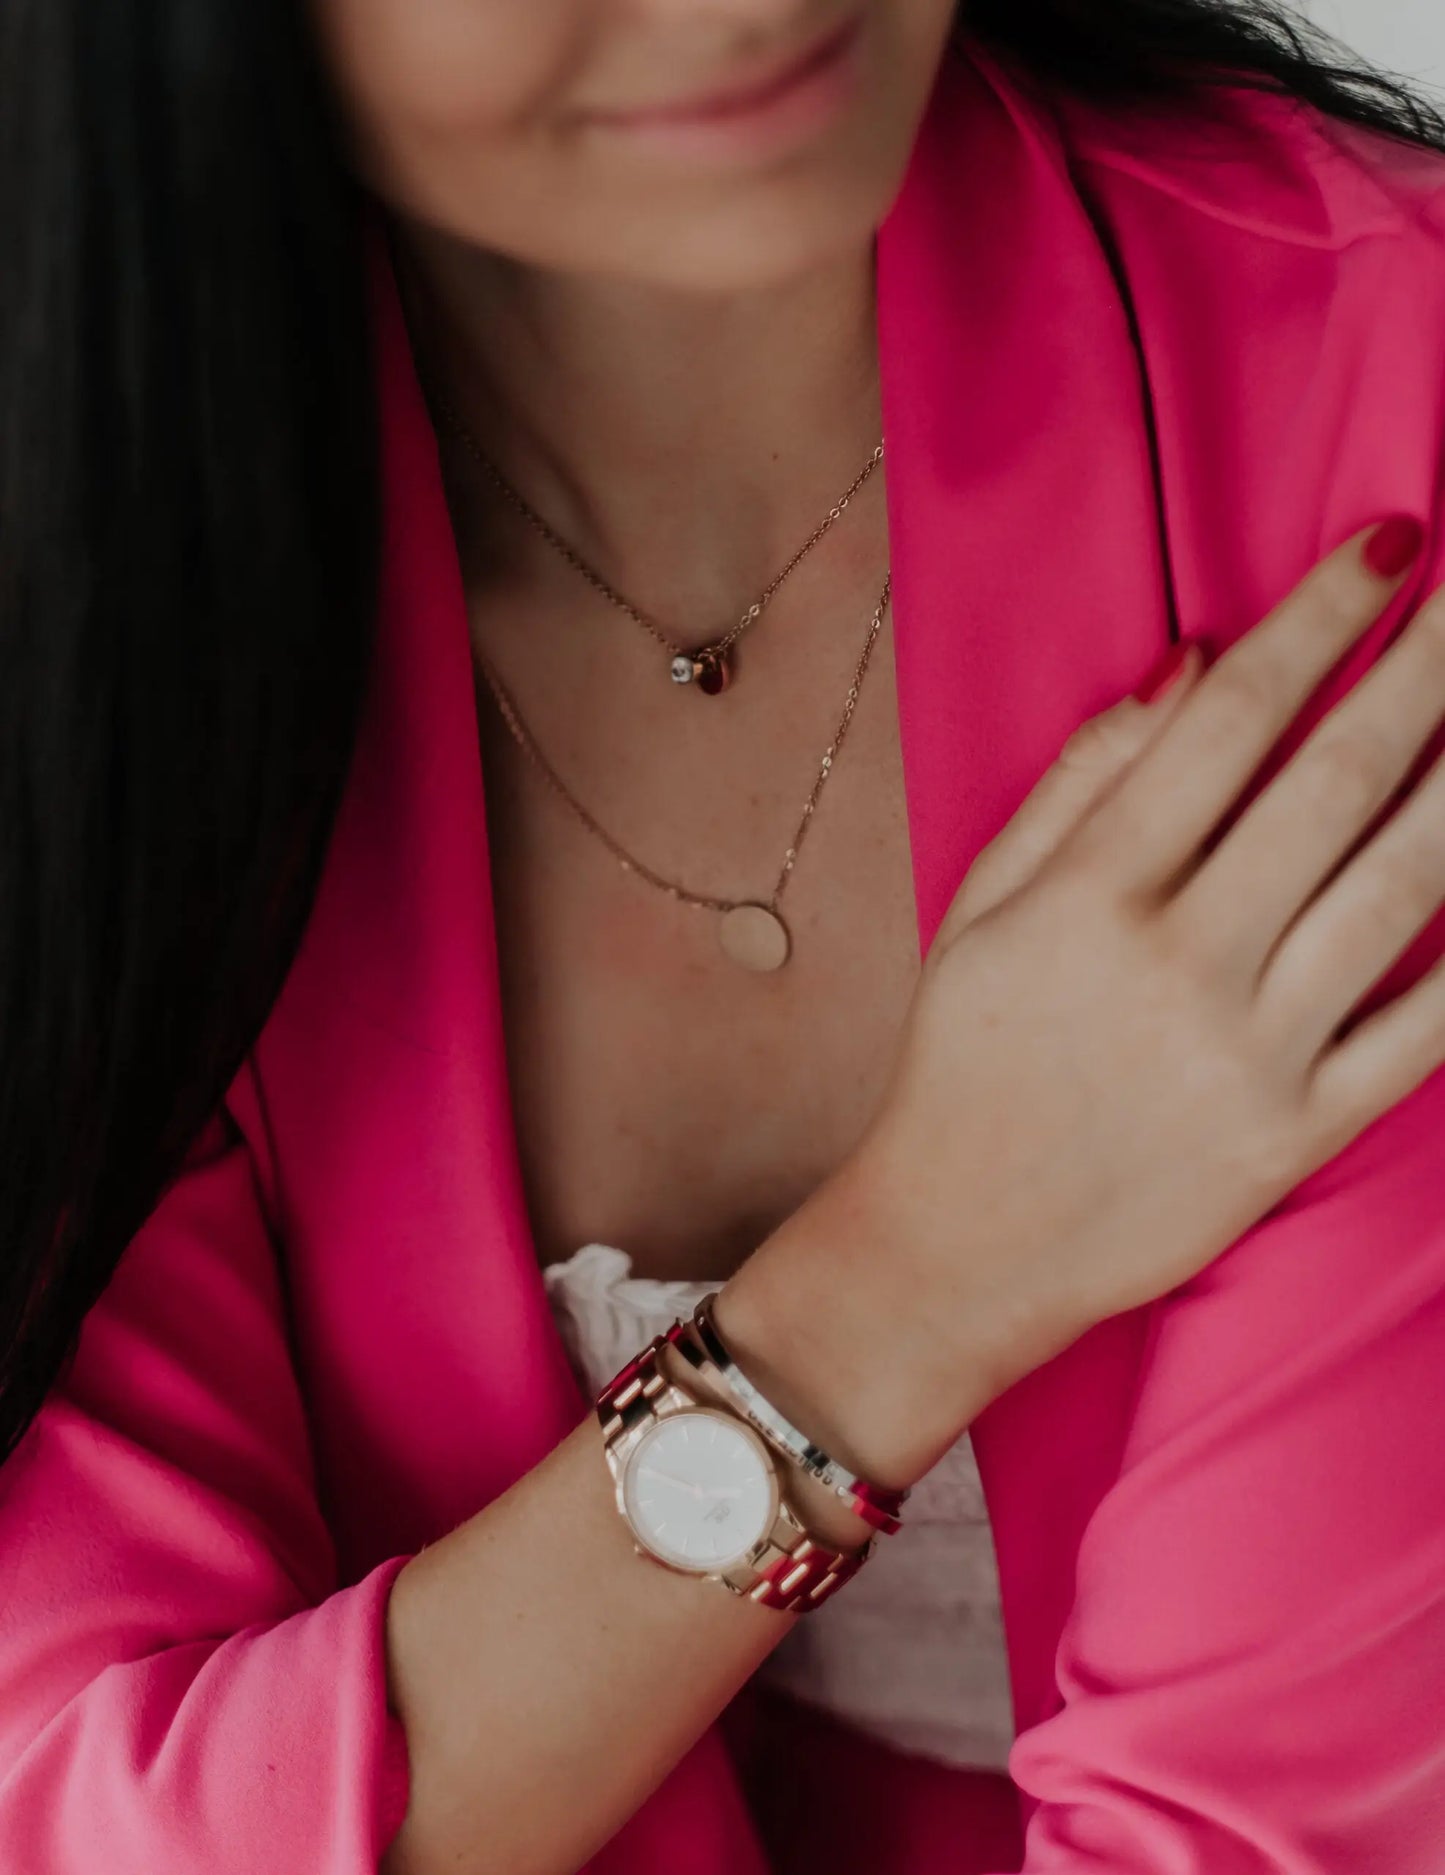 A woman in a pink jacket and gold jewelry wears the Necklace with Medallion - Good Vibes. Close-ups show a watch and necklace details. Stainless steel, 49 cm length, 18 mm medallion.